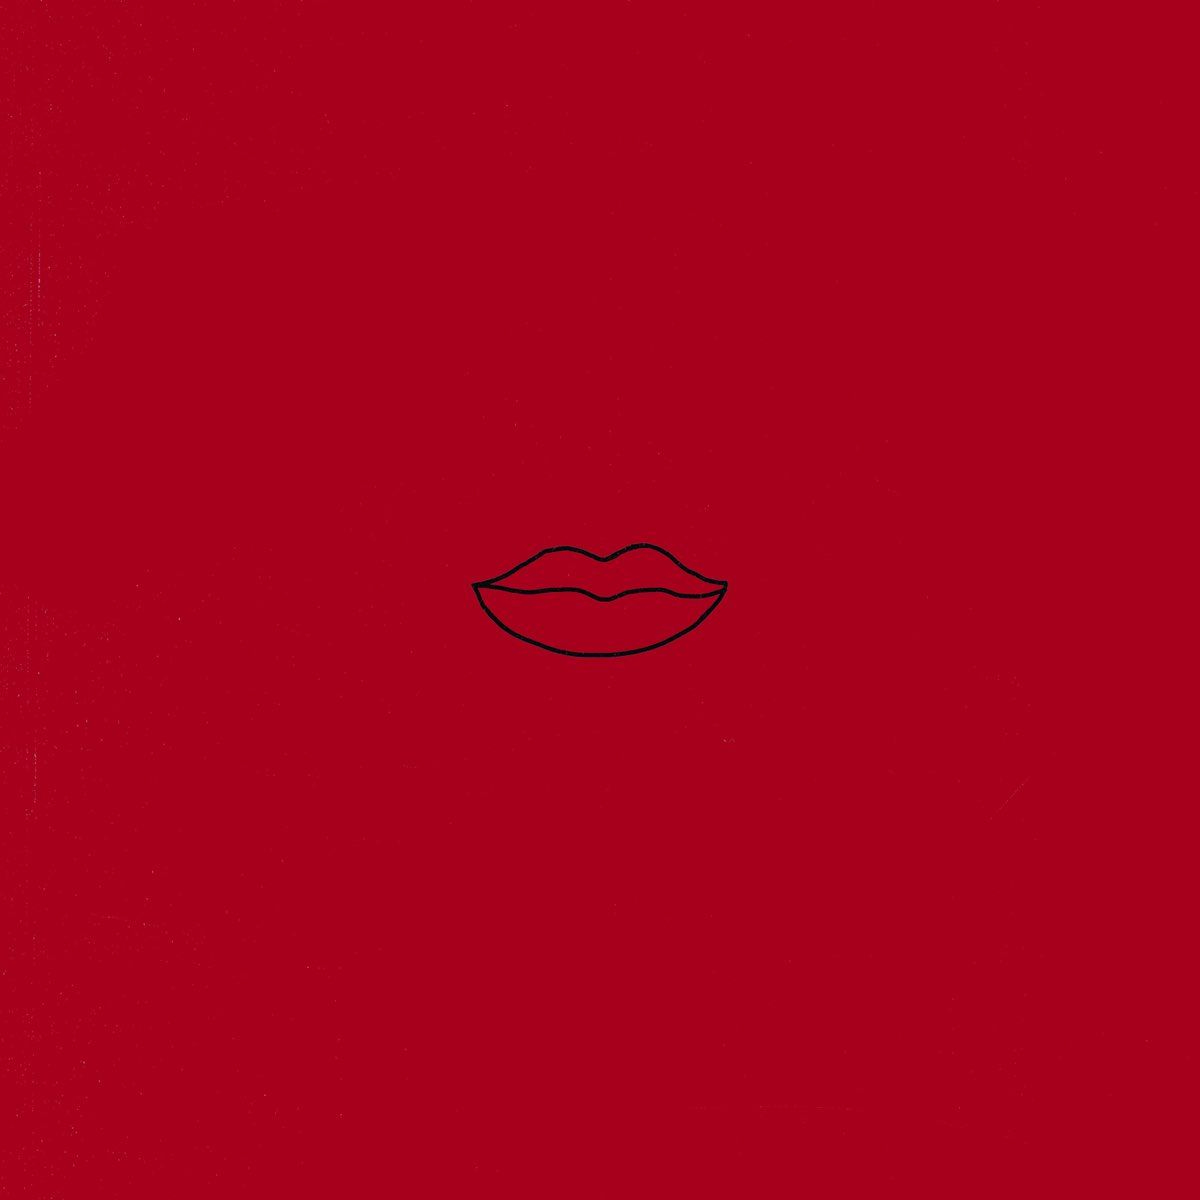 A red background with the outline of lips - YouTube